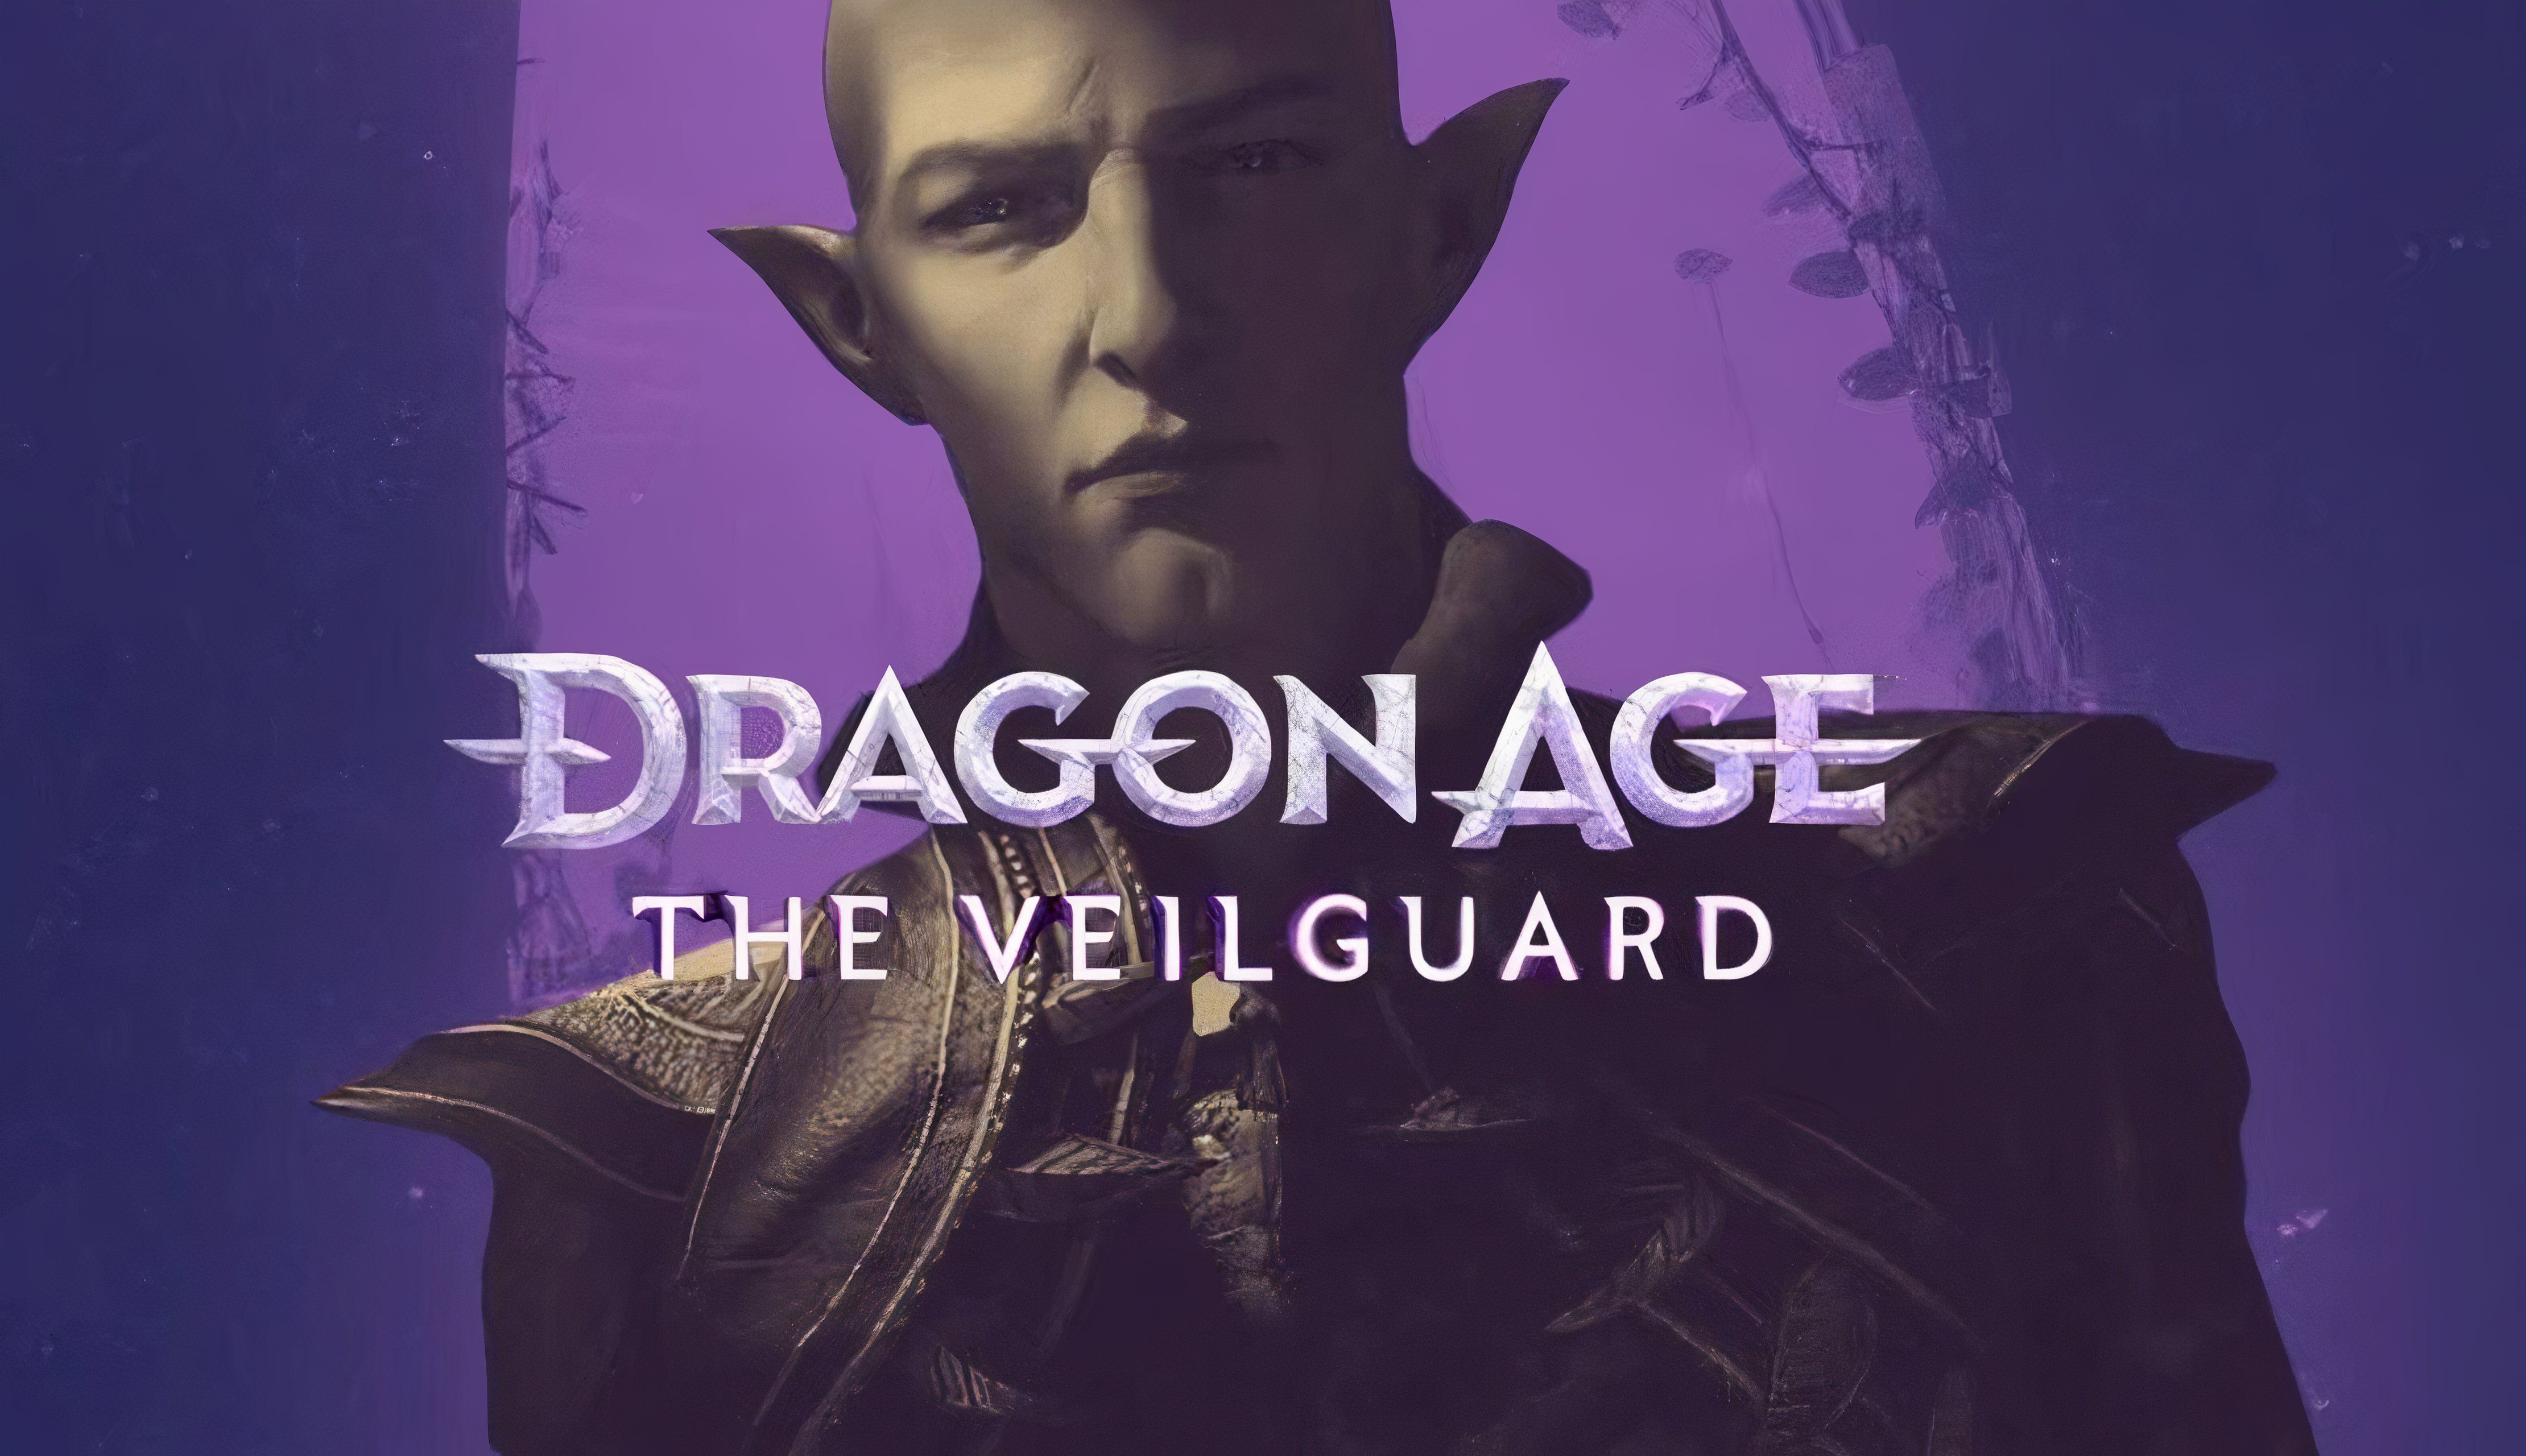 An image of Solas from the Dragon Age series with the Dragon Age: The Veilguard official logo overlaid